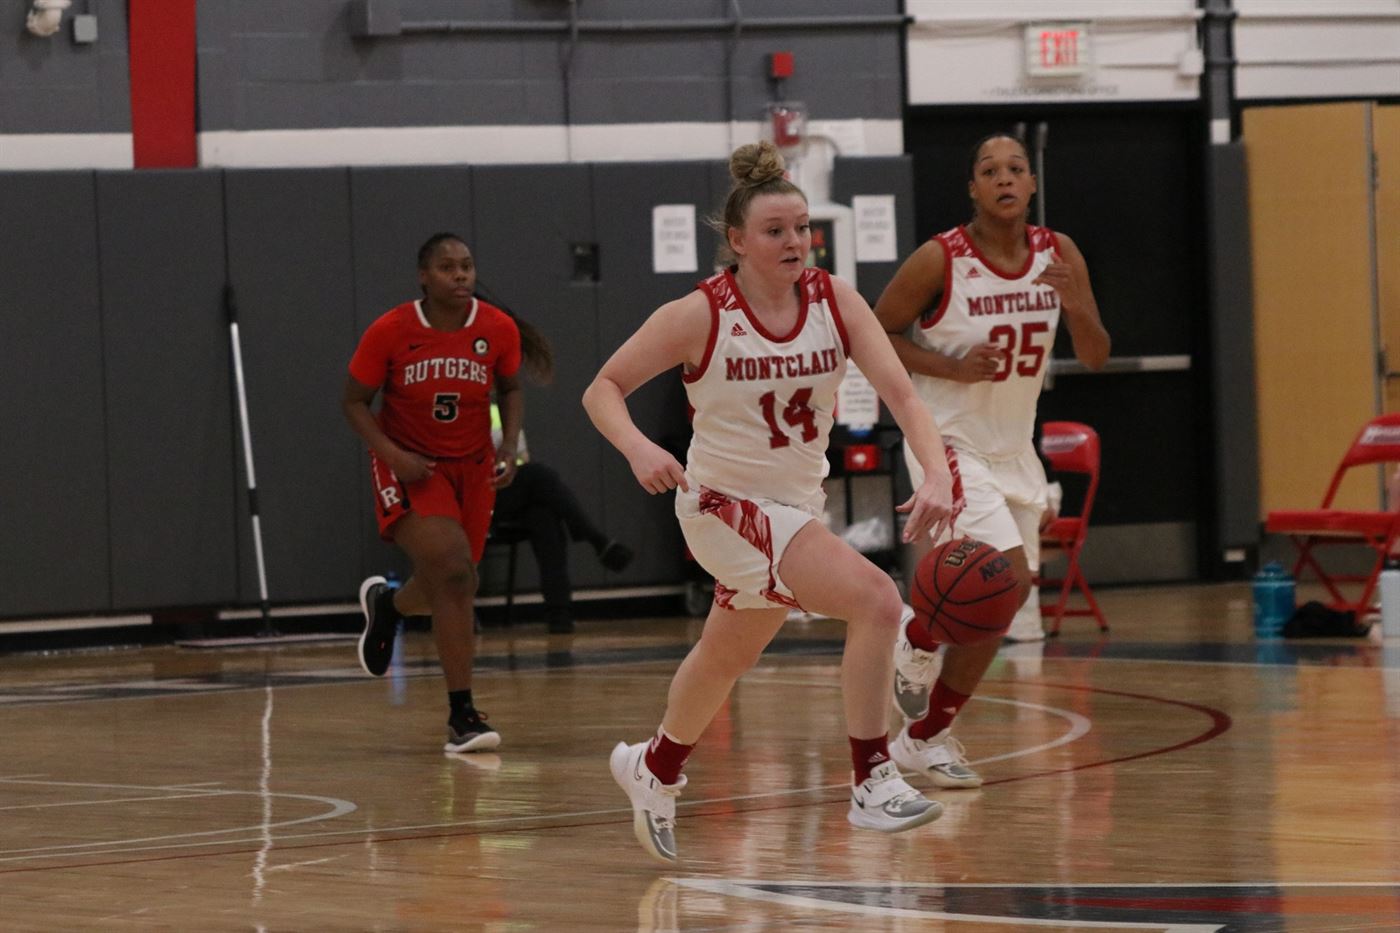 Red Hawks sophomore guard Nickie Carter pushes the ball during a fast-break opportunity during the NJAC quarterfinals against Rutgers-Camden on March 5. Photo courtesy of Julia Radley